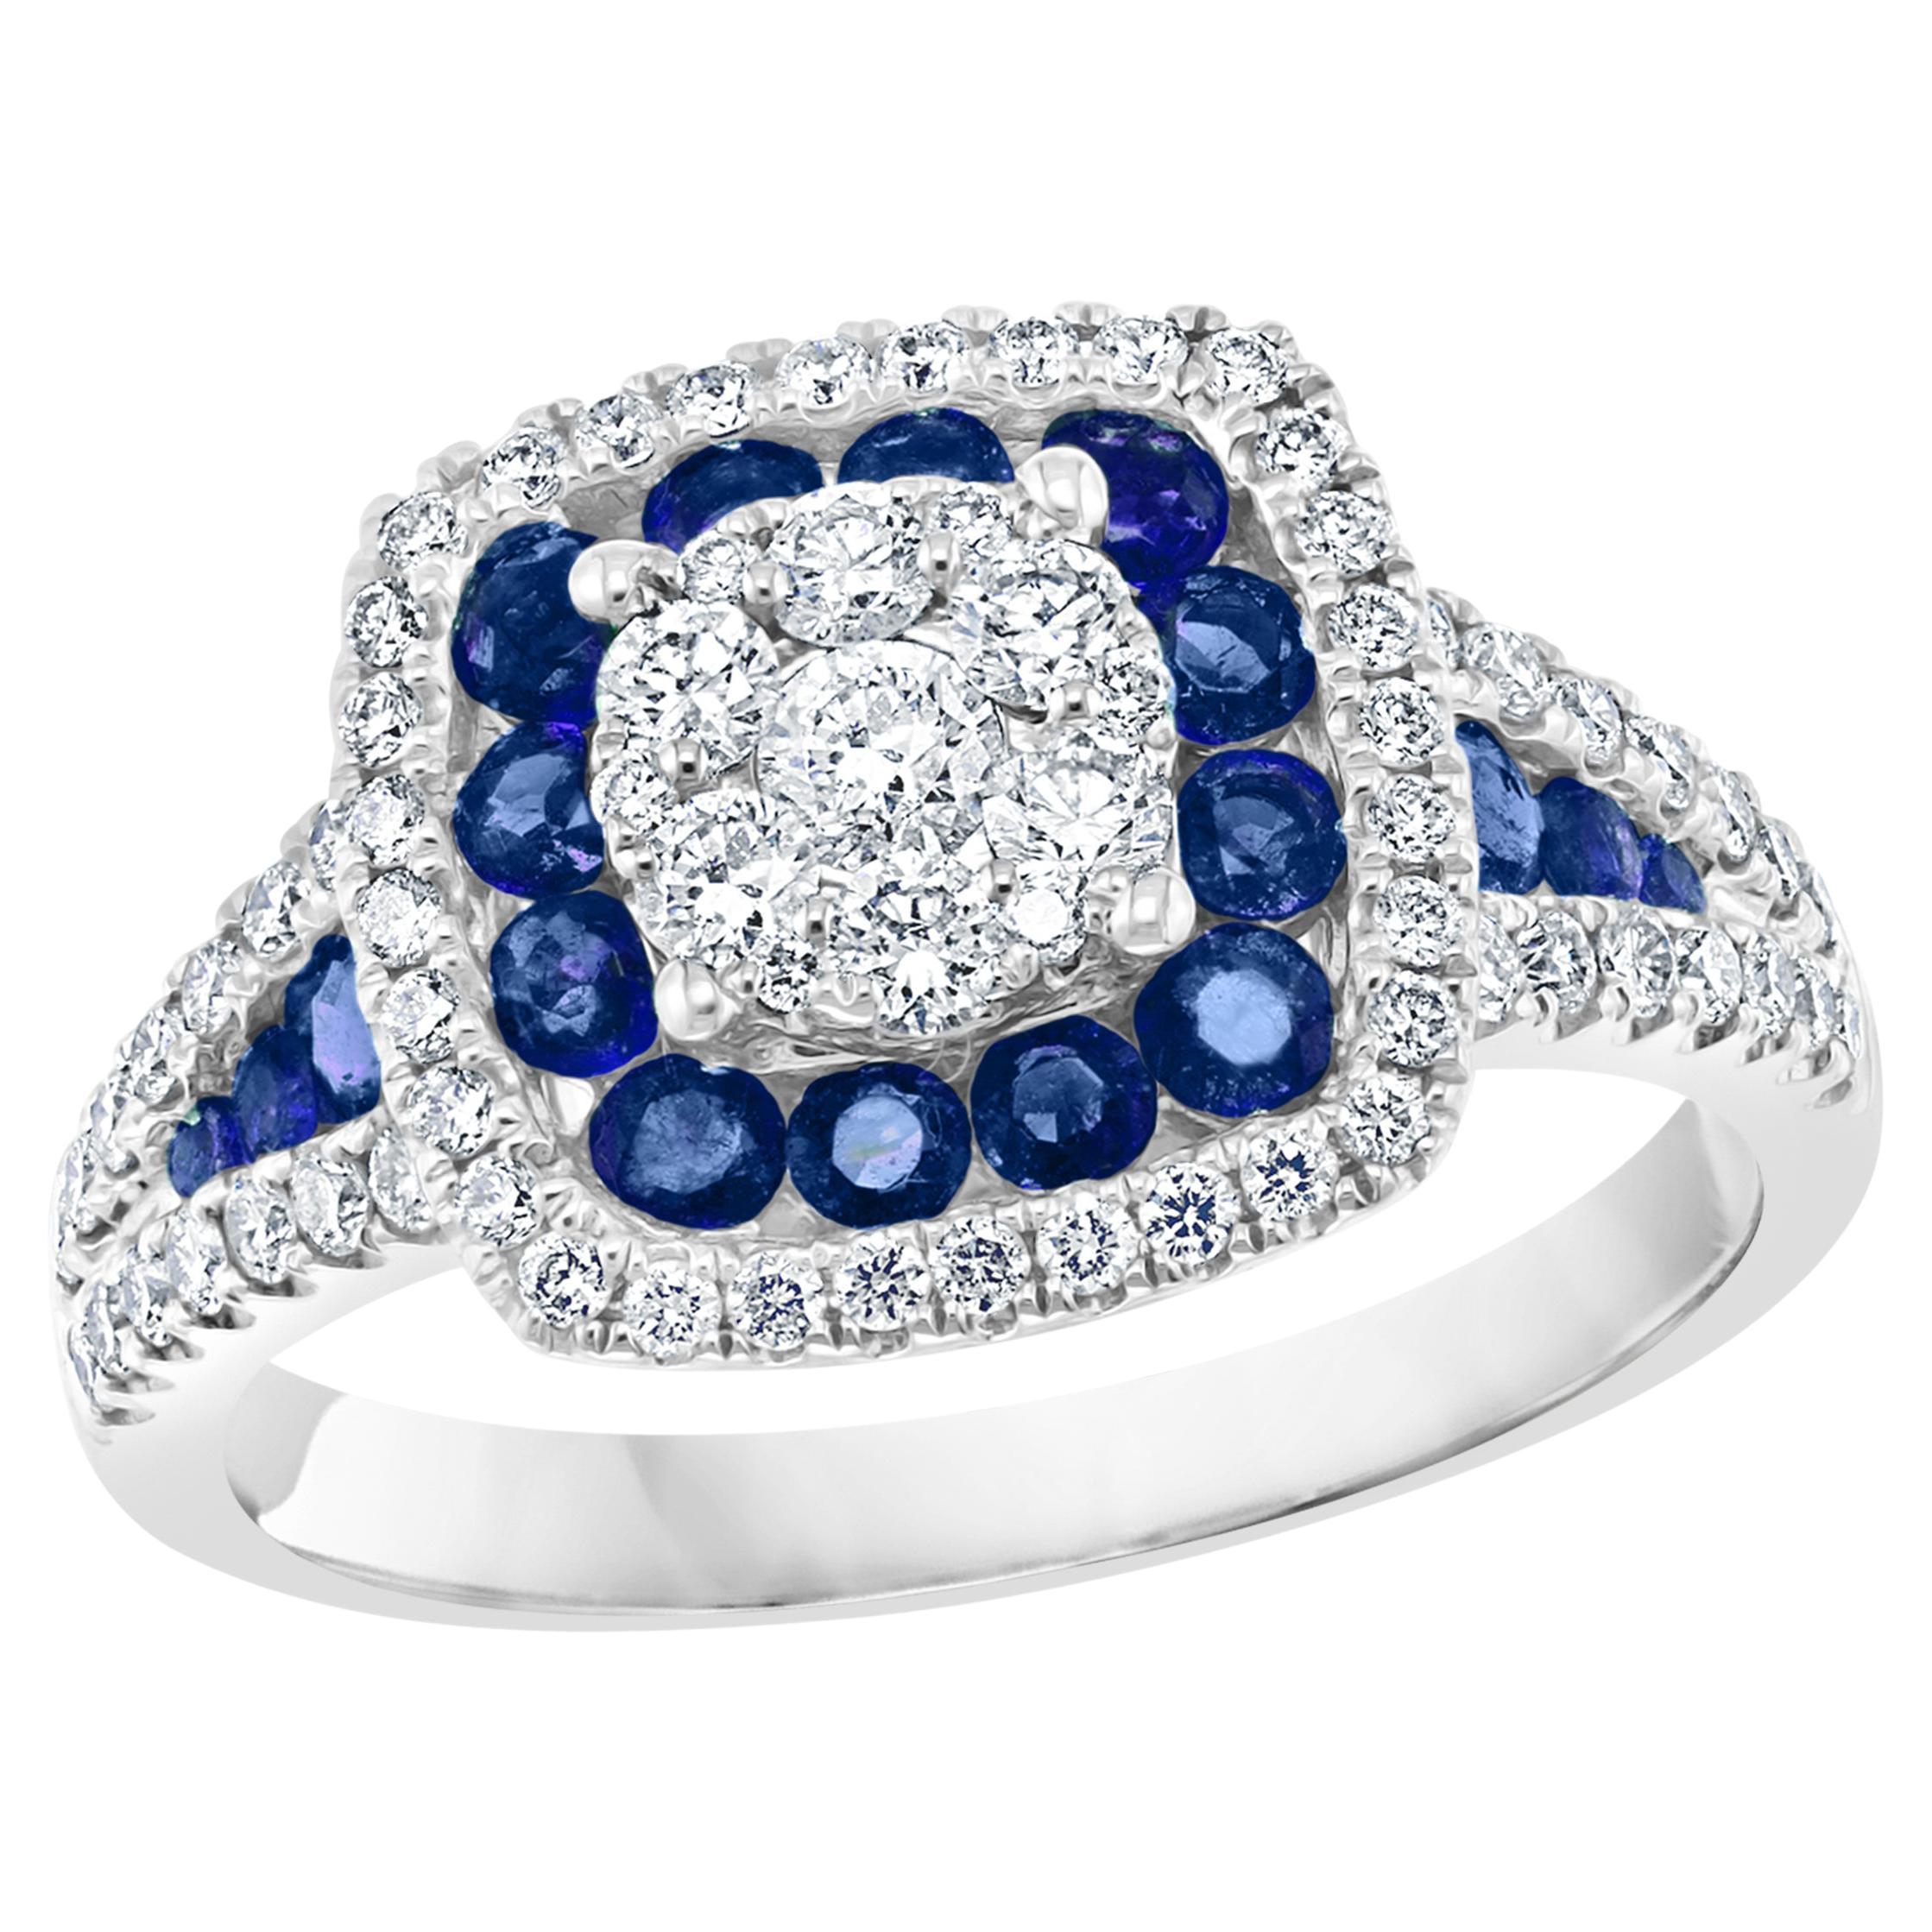 0.72 Carat of Blue Sapphire and Diamond Cocktail Ring in 18K White Gold For Sale